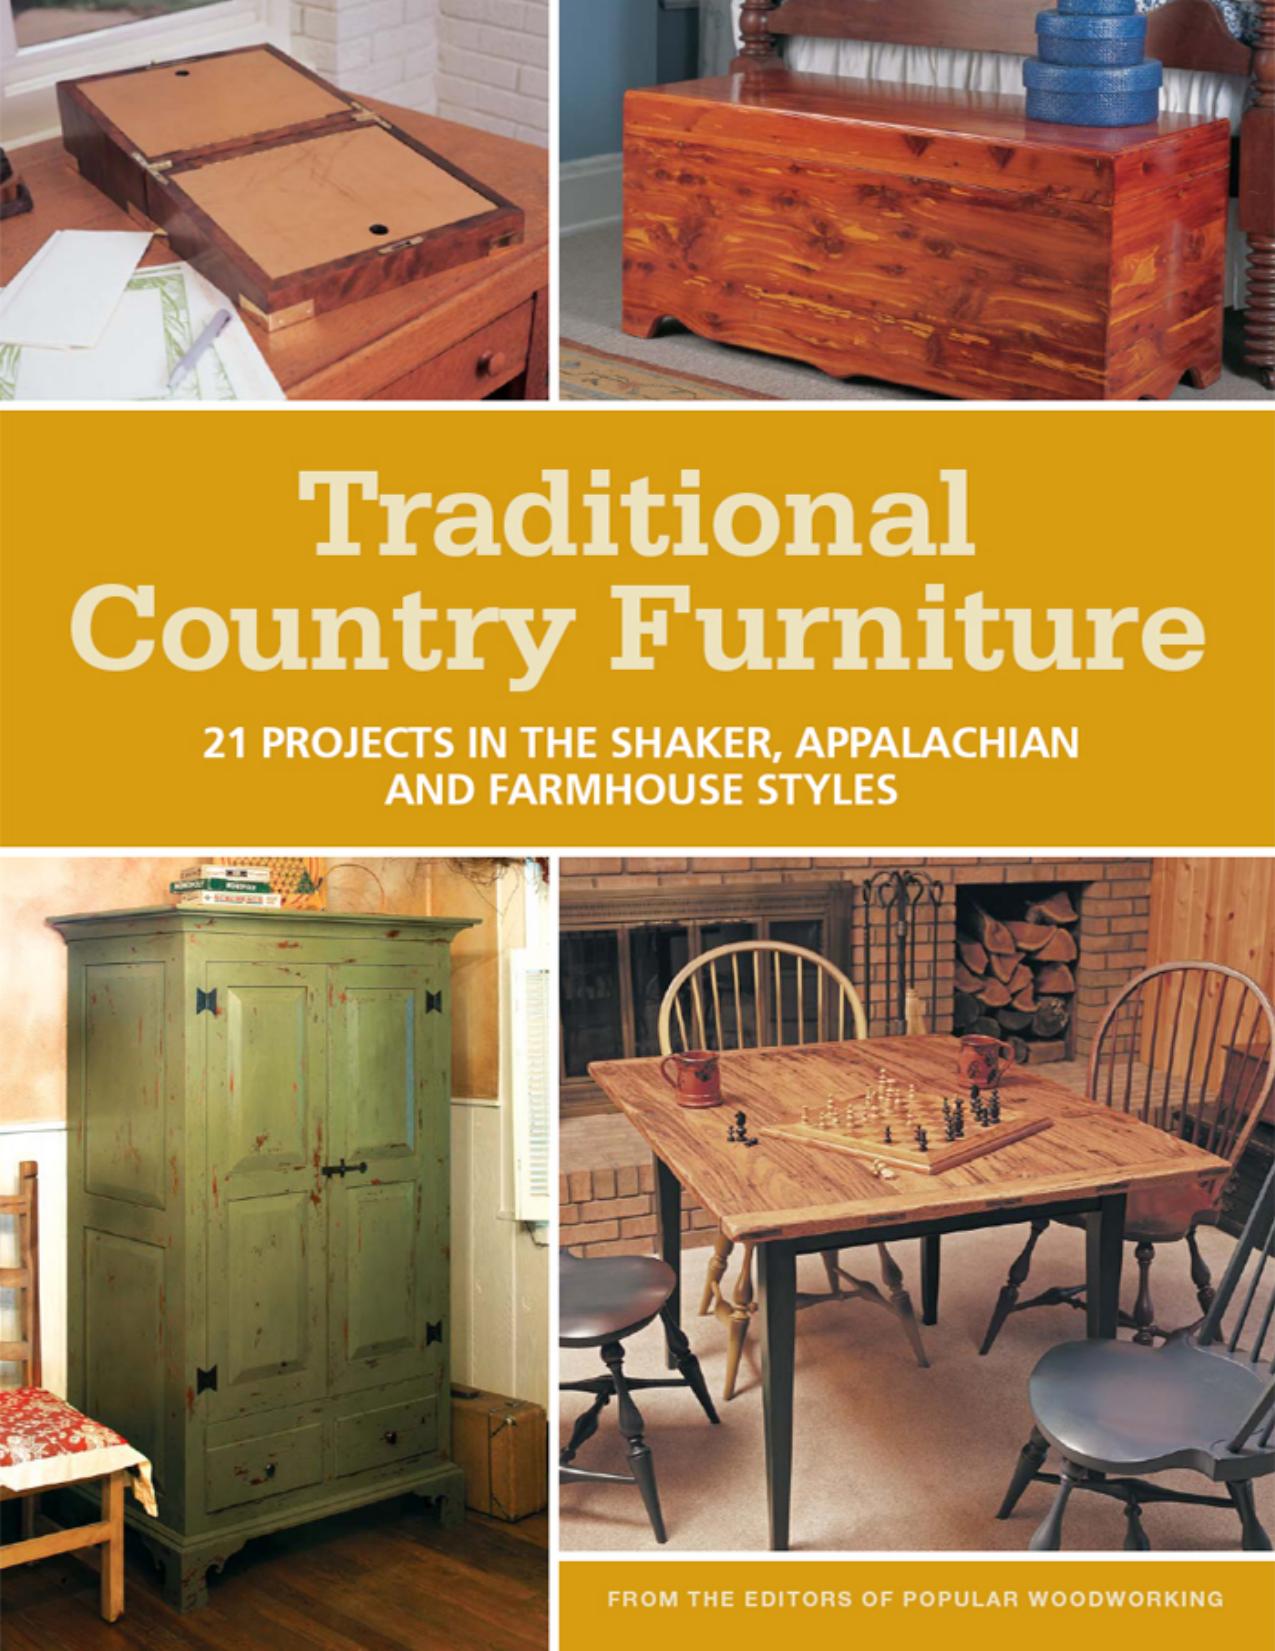 Traditional Country Furniture by Editors of Popular Woodworking